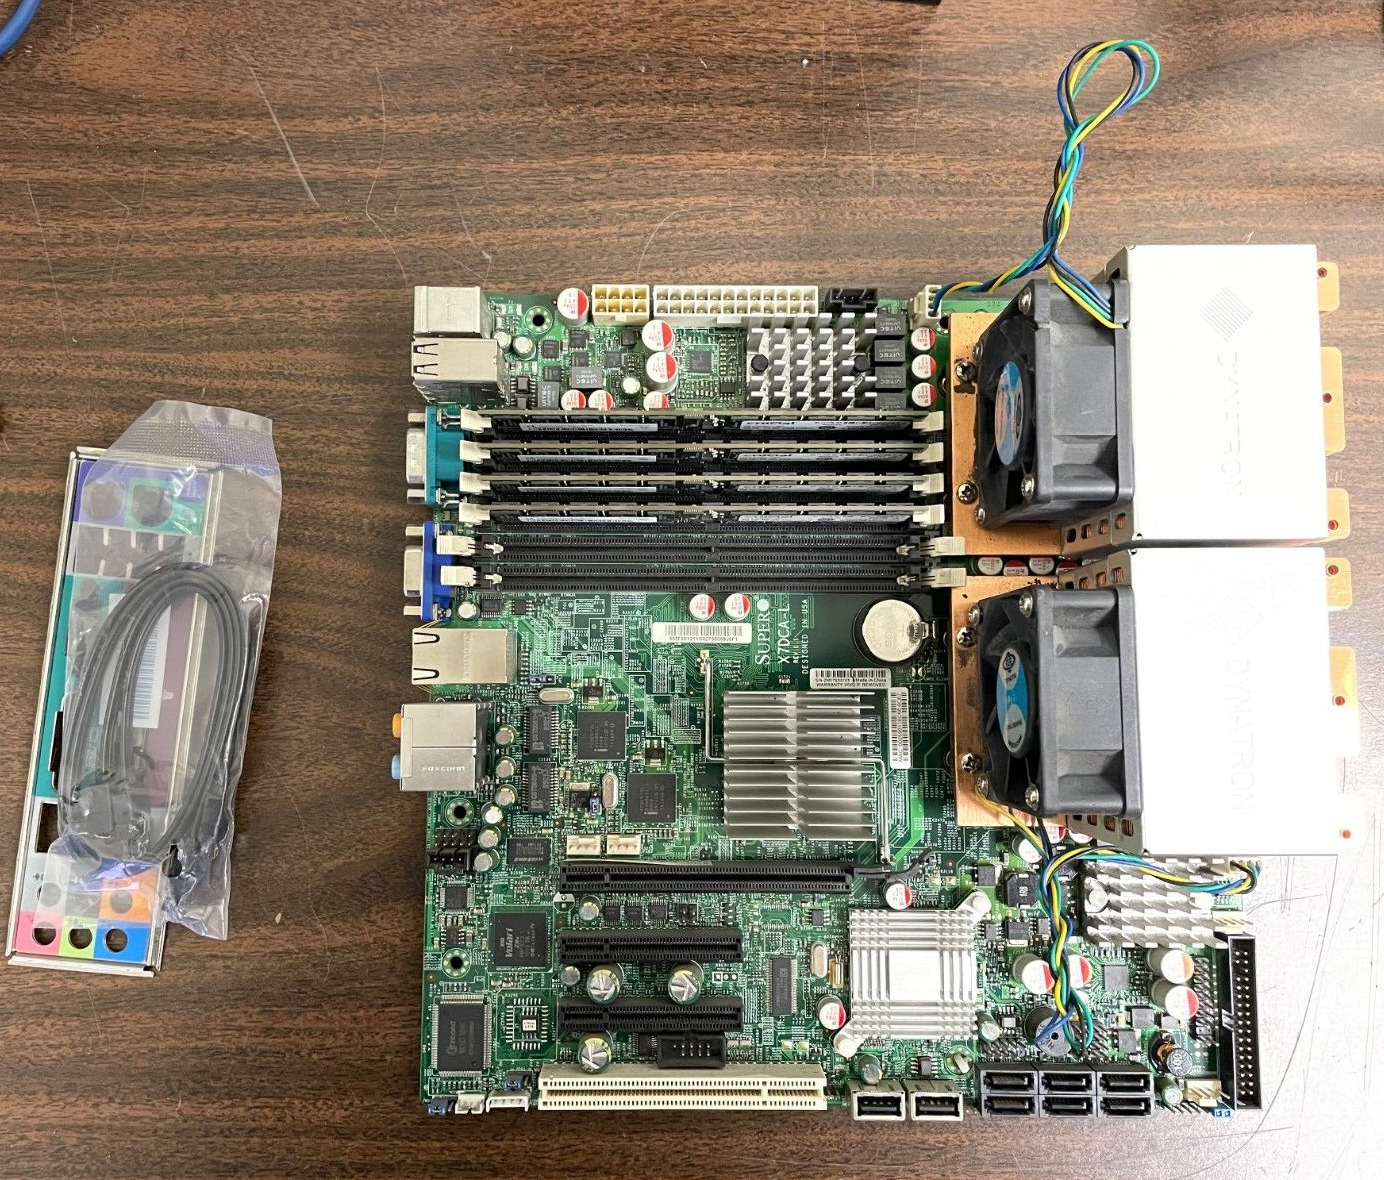 Working Pull SUPERMICRO X7DCA-L, with 16 GB Ram, and dual Xeon X5260 CPU's